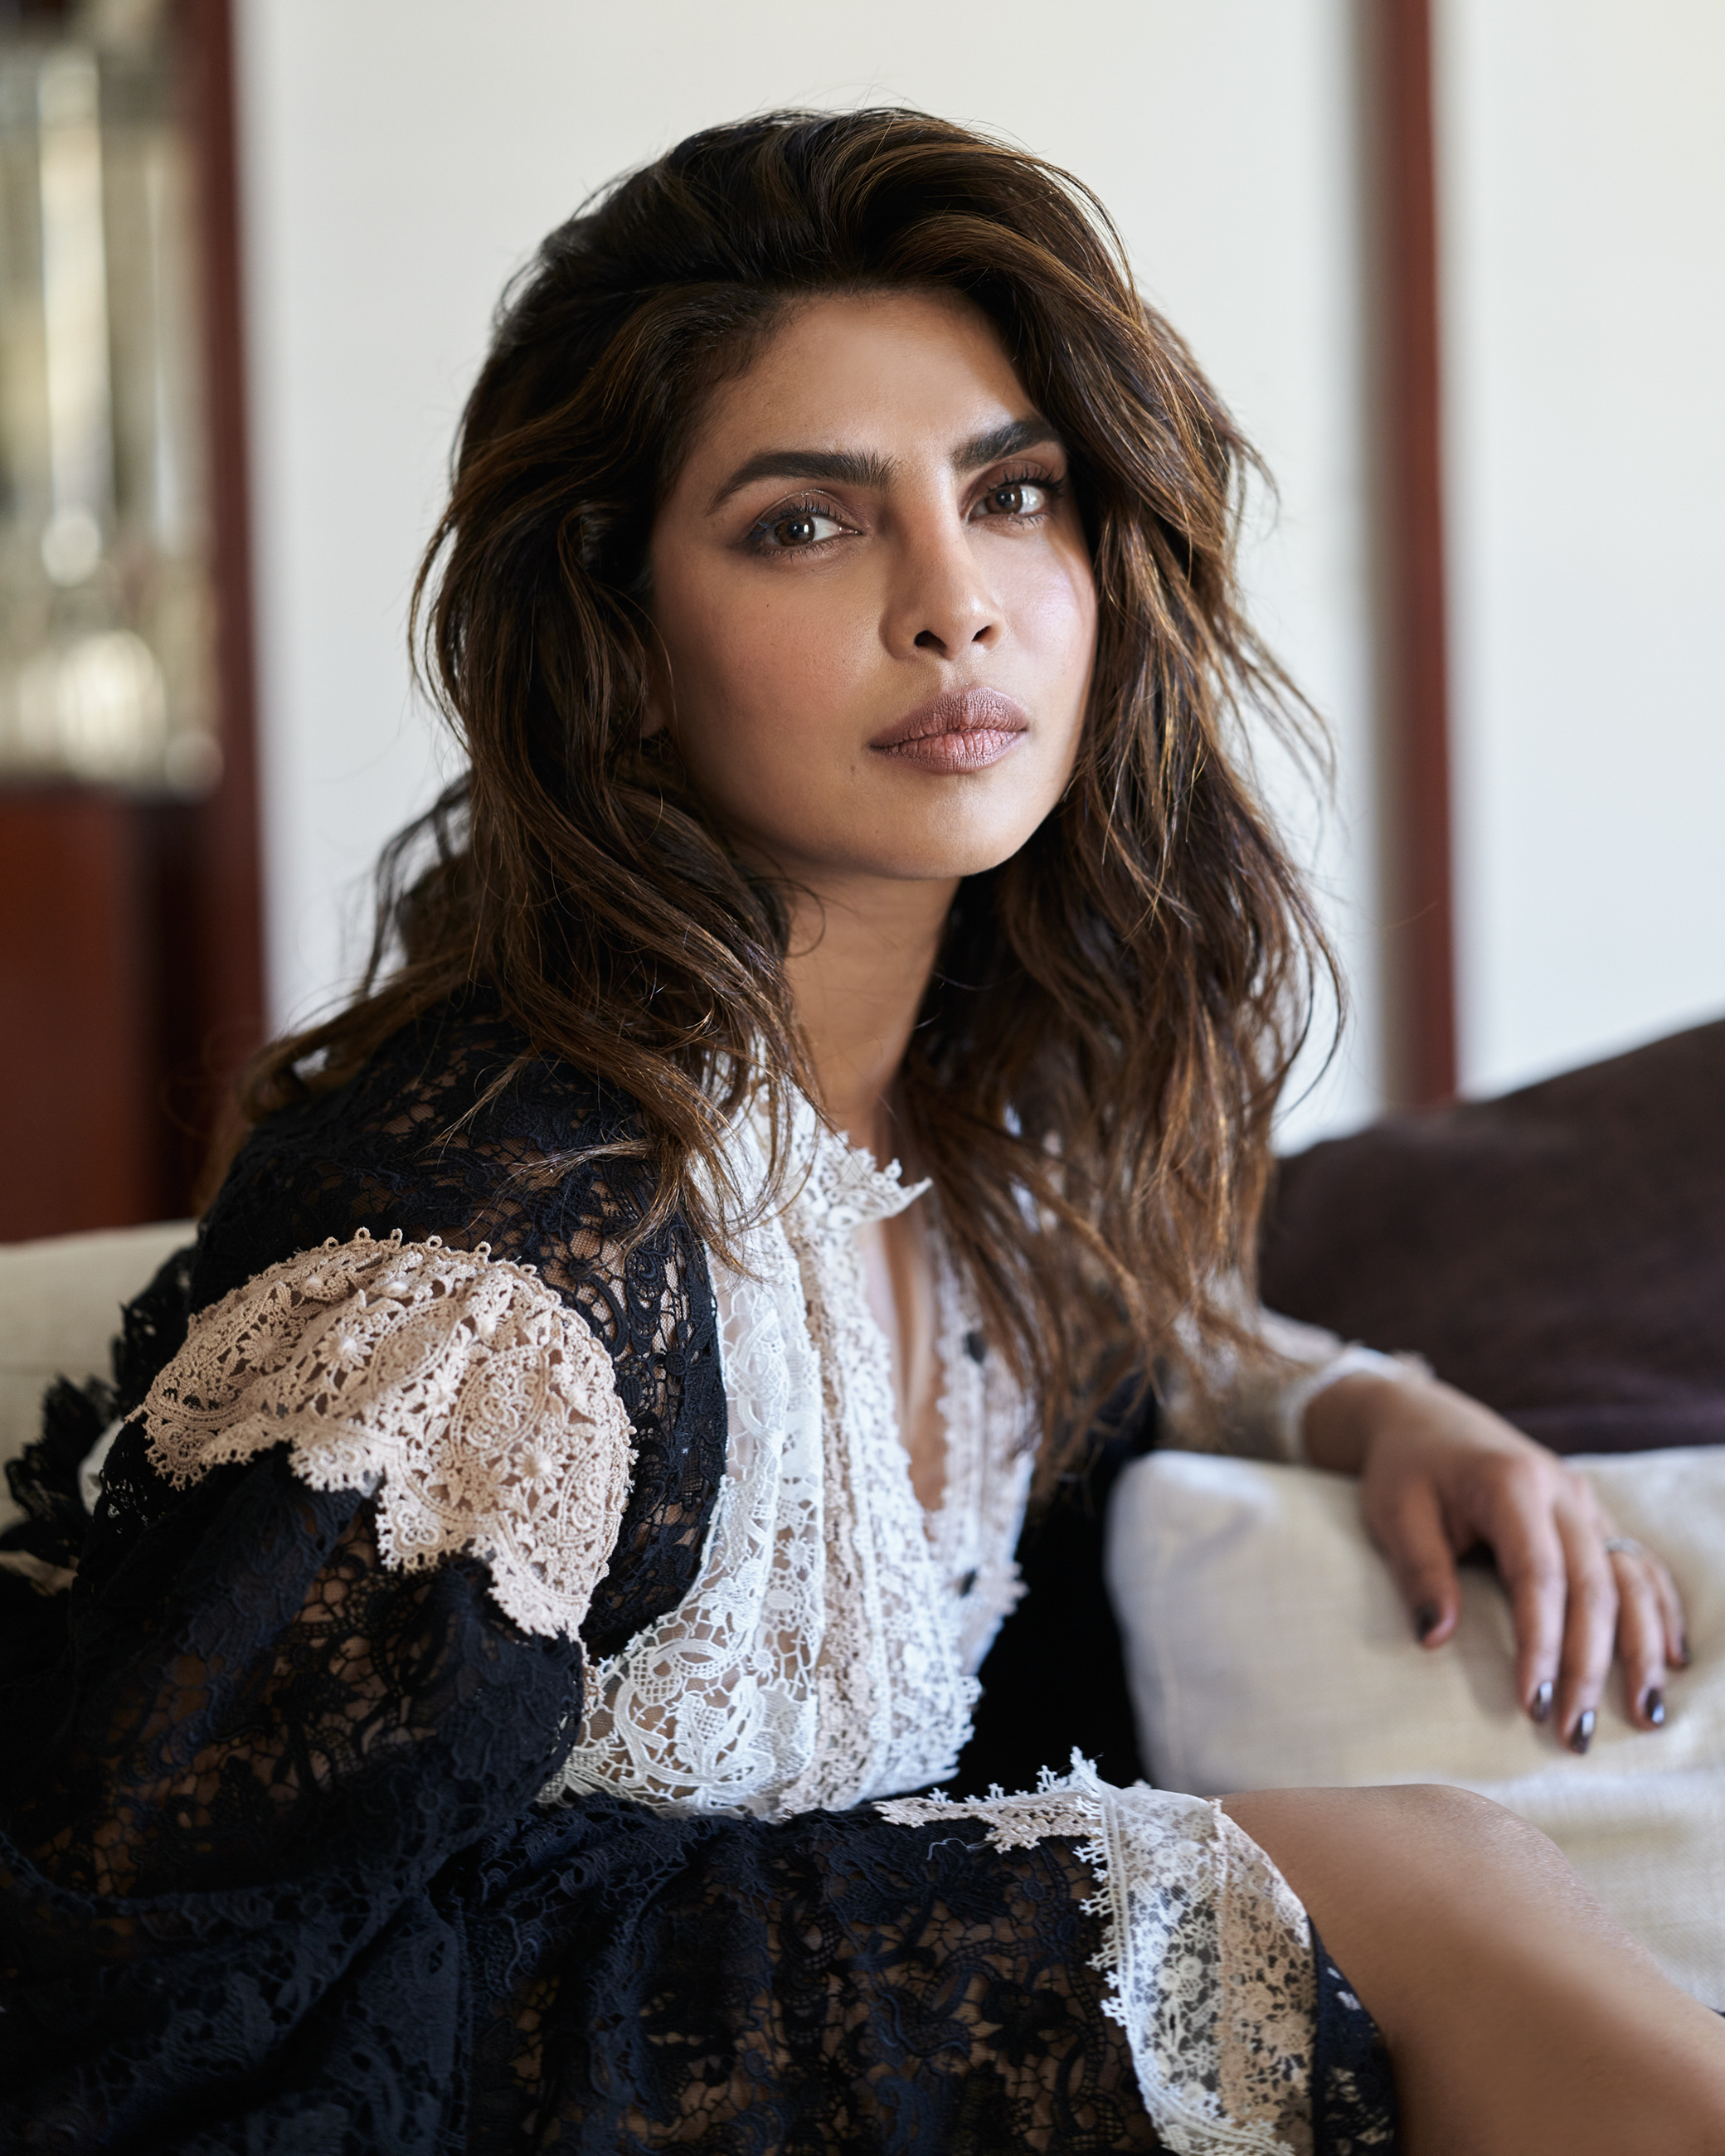 Marshalls Announces its First-ever Good Stuff Social Club with Priyanka Chopra Jonas – an Inclusive Space that Unlocks Access to Expert-Led, Interactive Programming | Photo Credit: Greg Williams Photography